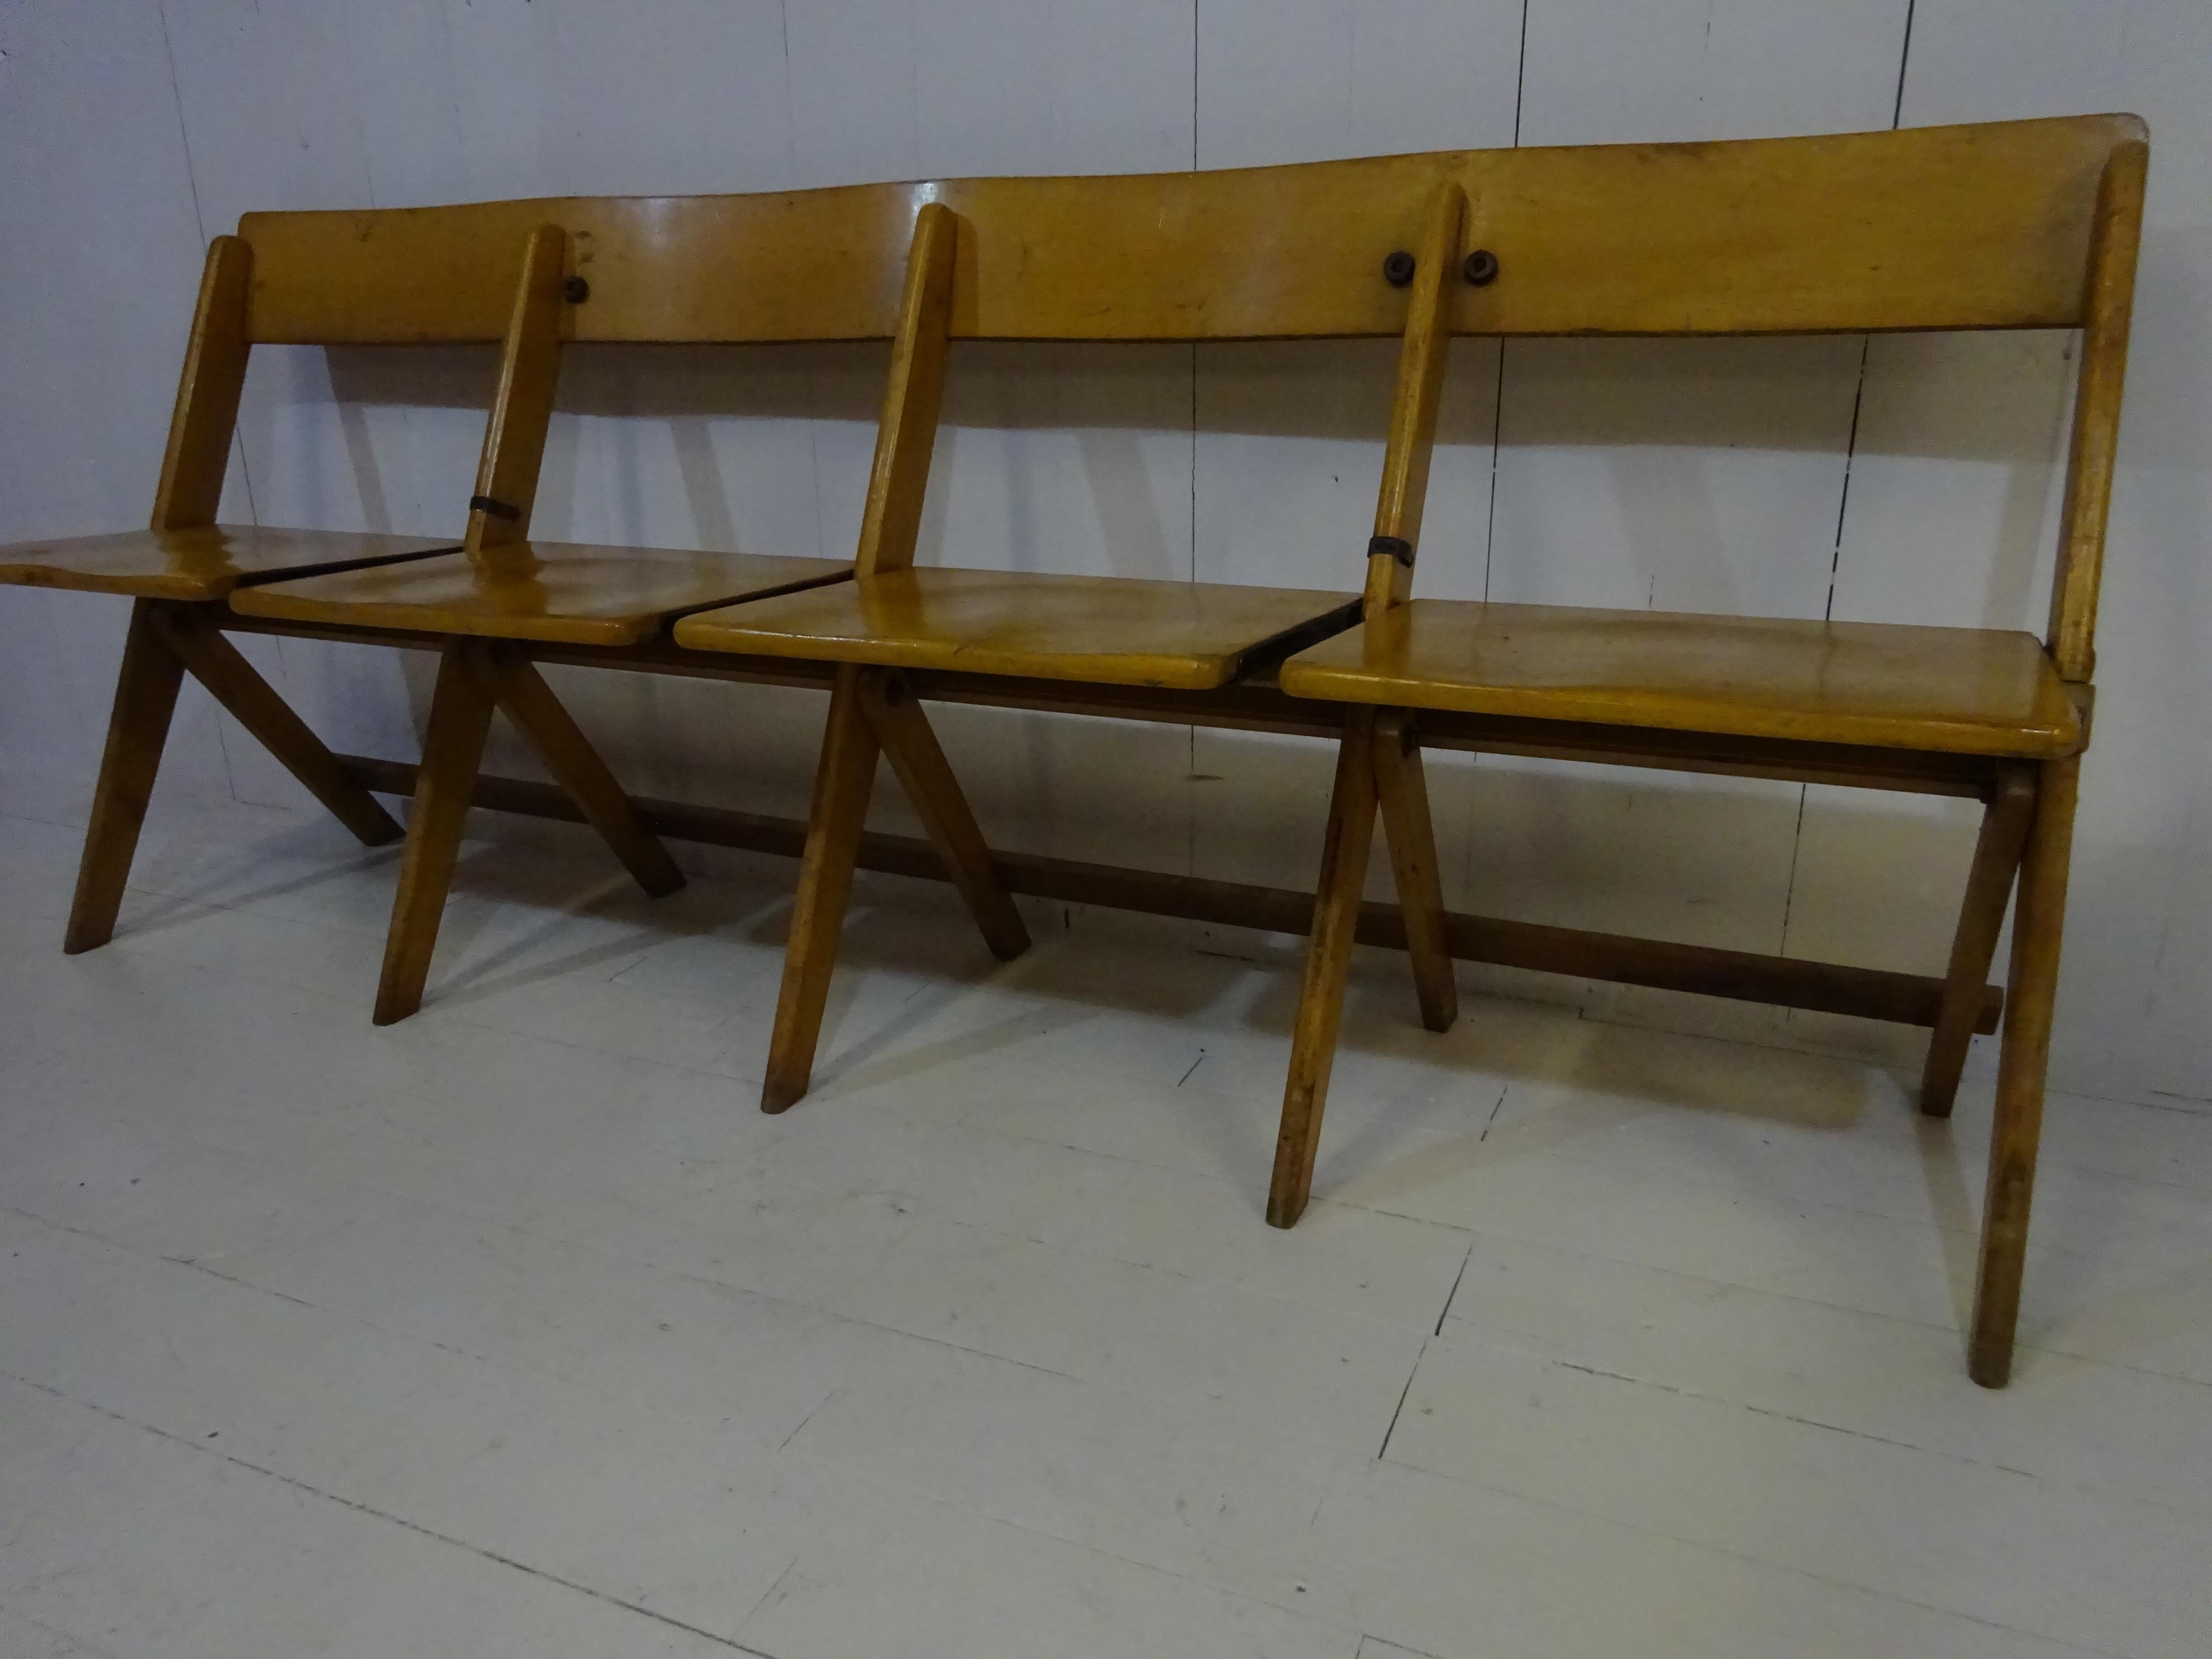 Hand-Crafted 1950's Vintage Conjoined Folding Chapel Chairs For Sale